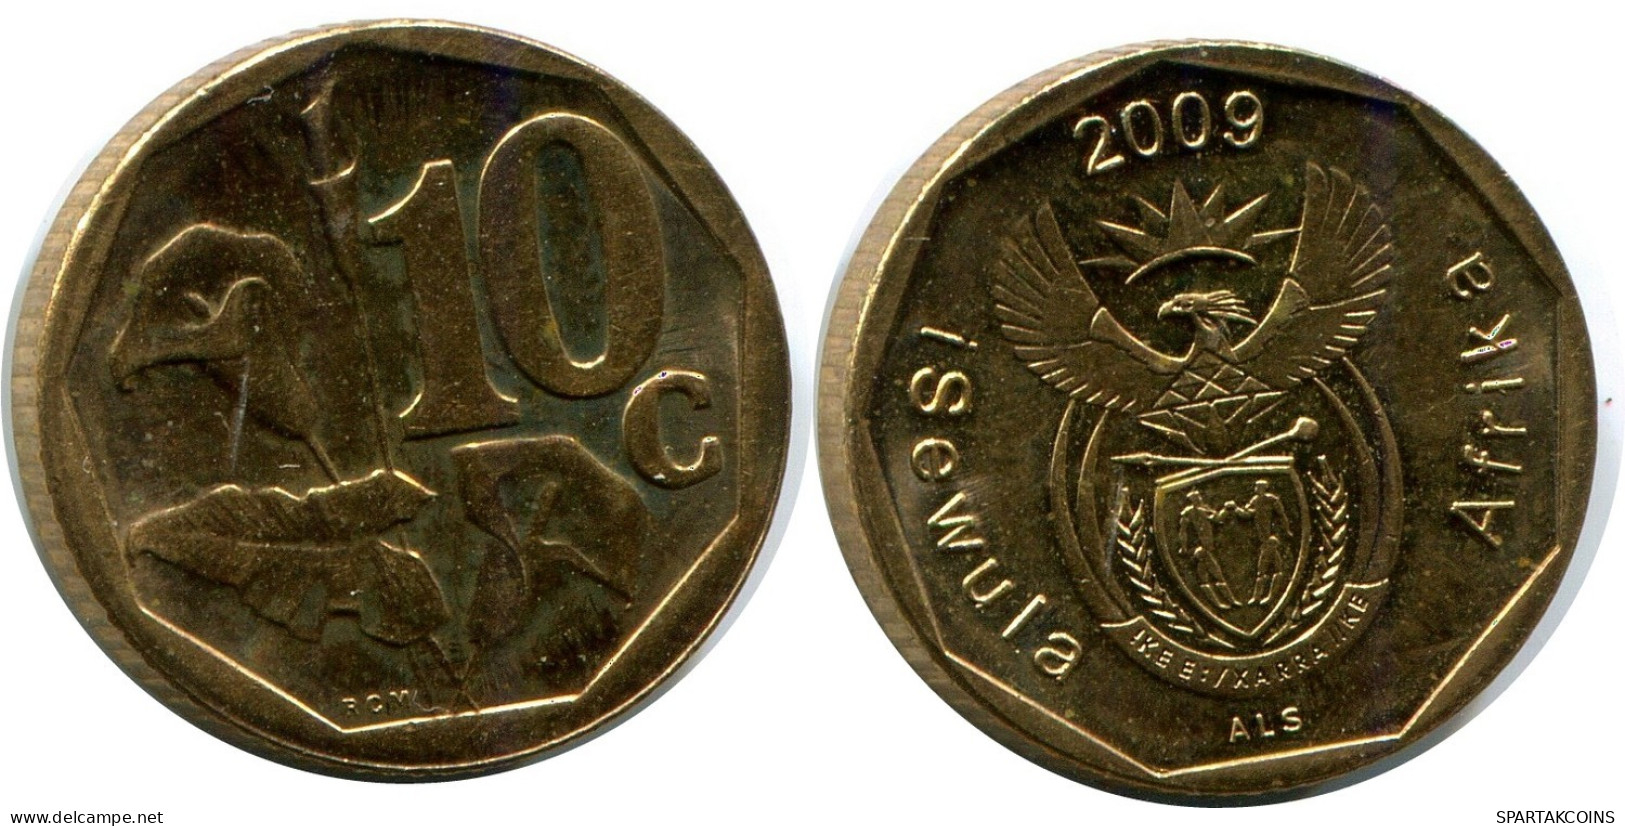 10 CENTS 2009 SOUTH AFRICA Coin #AP939.U.A - South Africa